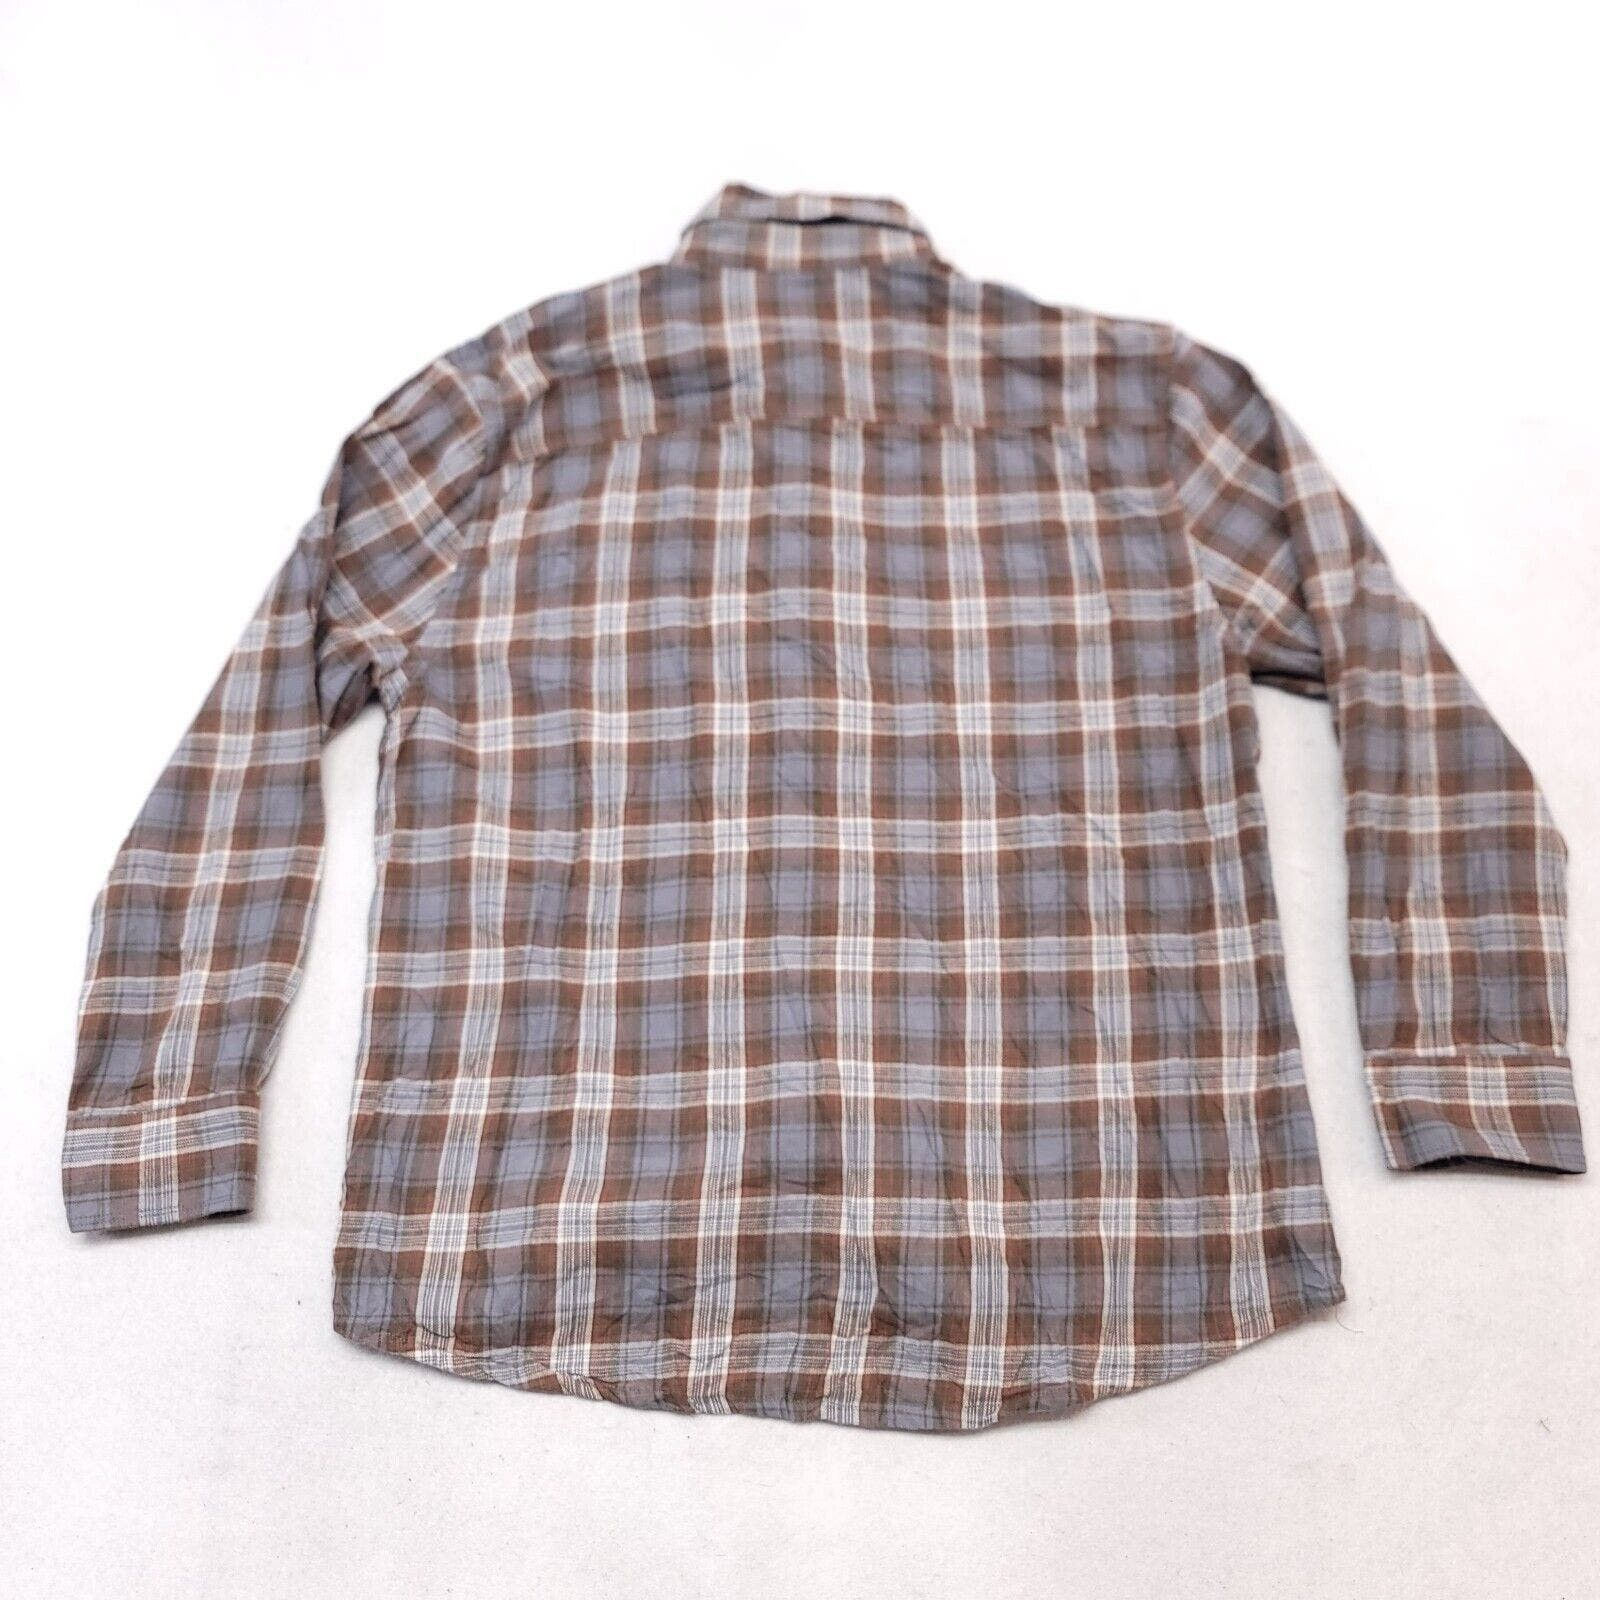 Clearwater Outfitters Clearwater Outfitters Tartan Flannel Shirt Mens Size L Brown Size US L / EU 52-54 / 3 - 10 Preview